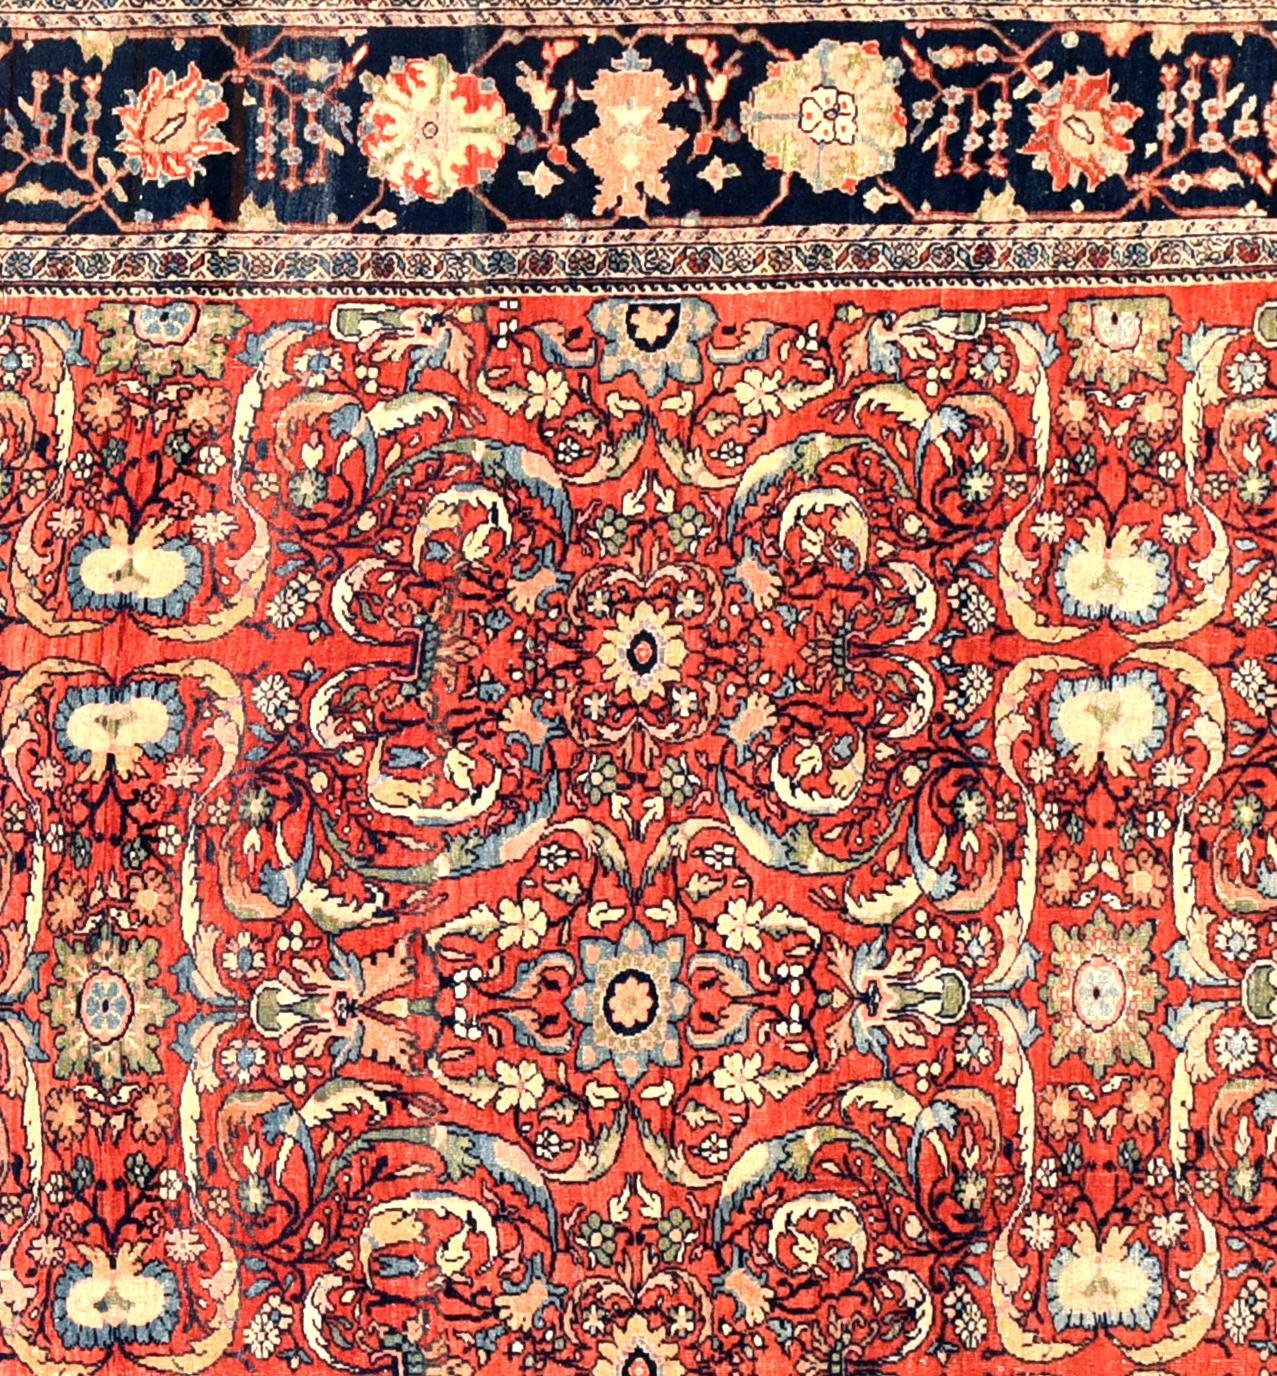 Persian carpets known as Farahan come from an area north of the city of Arak in western Iran, whose Persian rugs were arguably the finest and most renowned items made during the 19th century. Elegance, reserved refinement and subtlety characterize